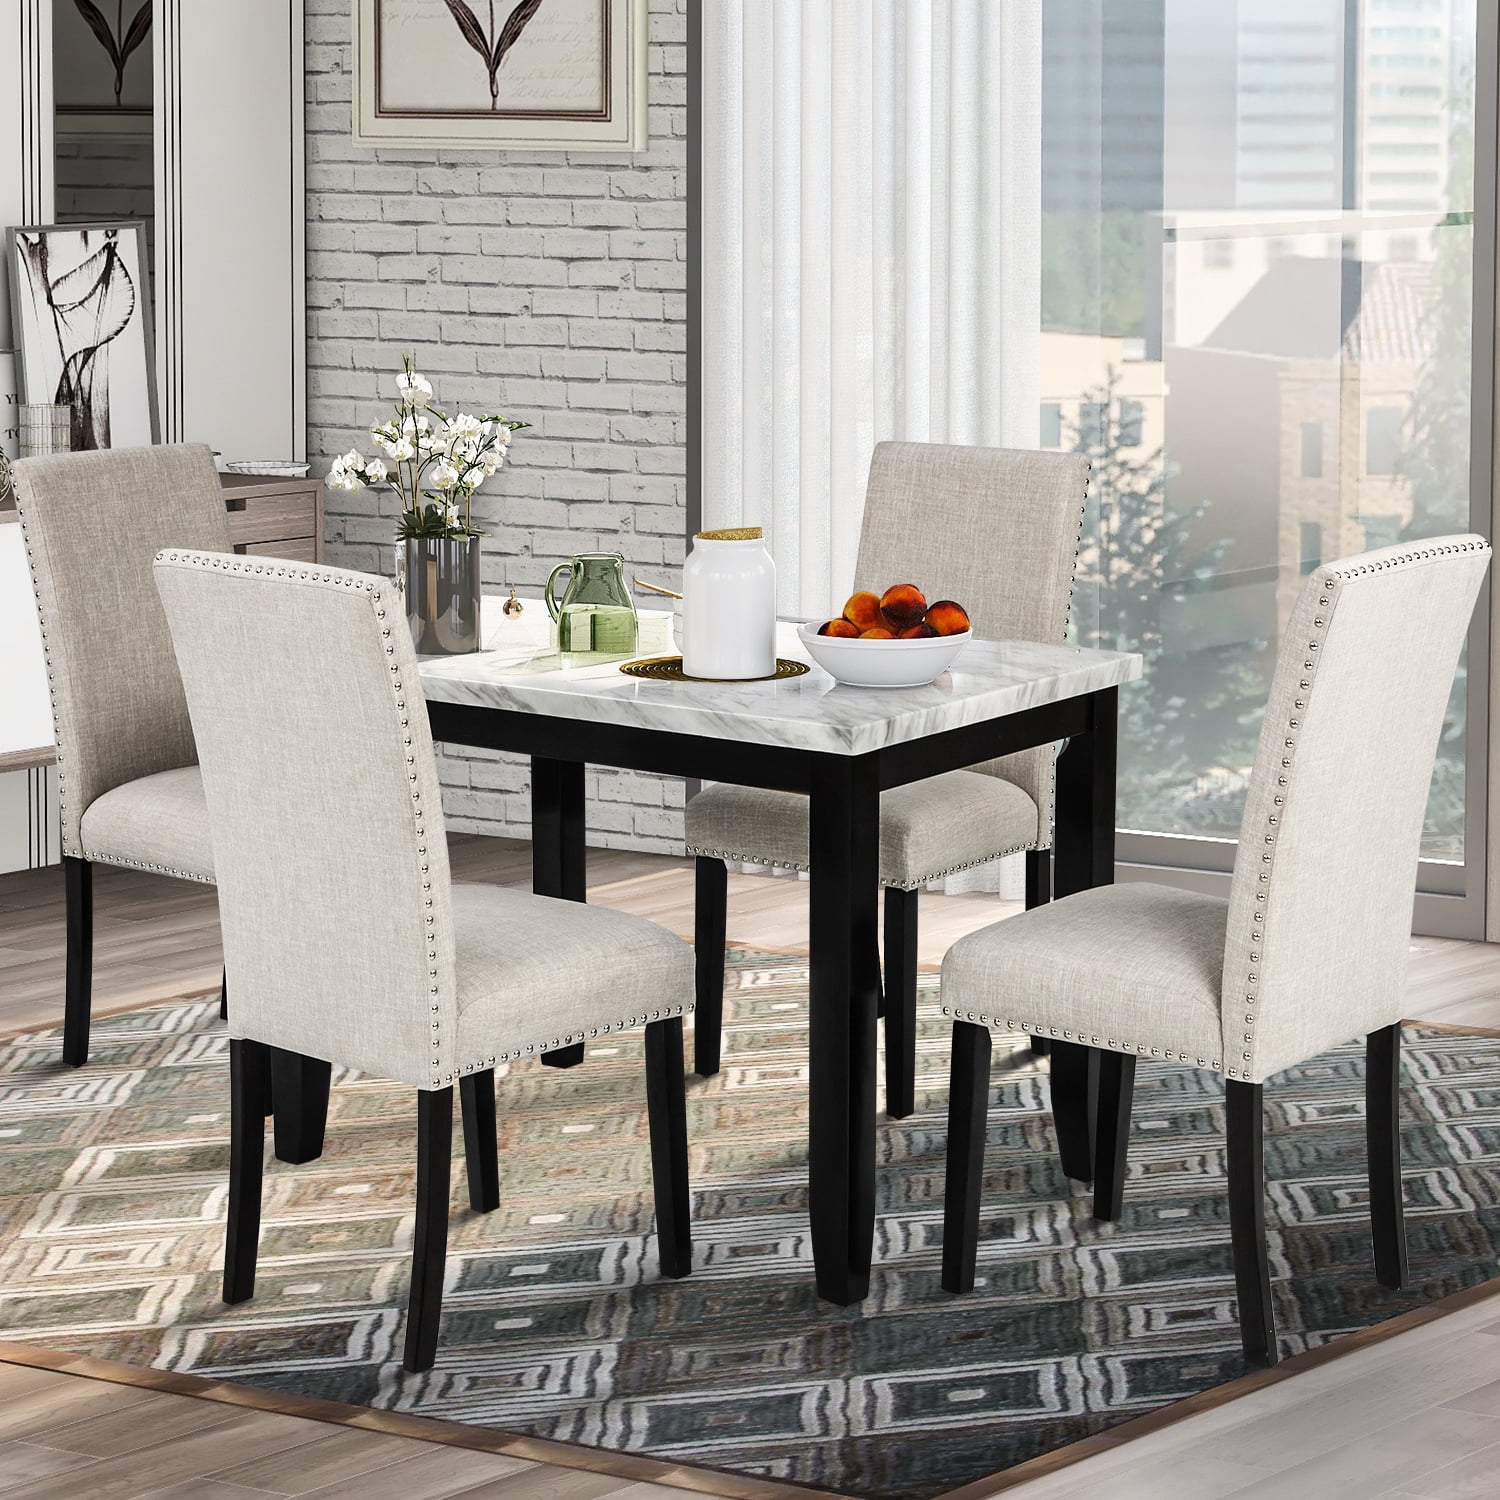 Kepooman 5-Piece Faux Marble Dining Table Set with 4 Thicken Cushion ...